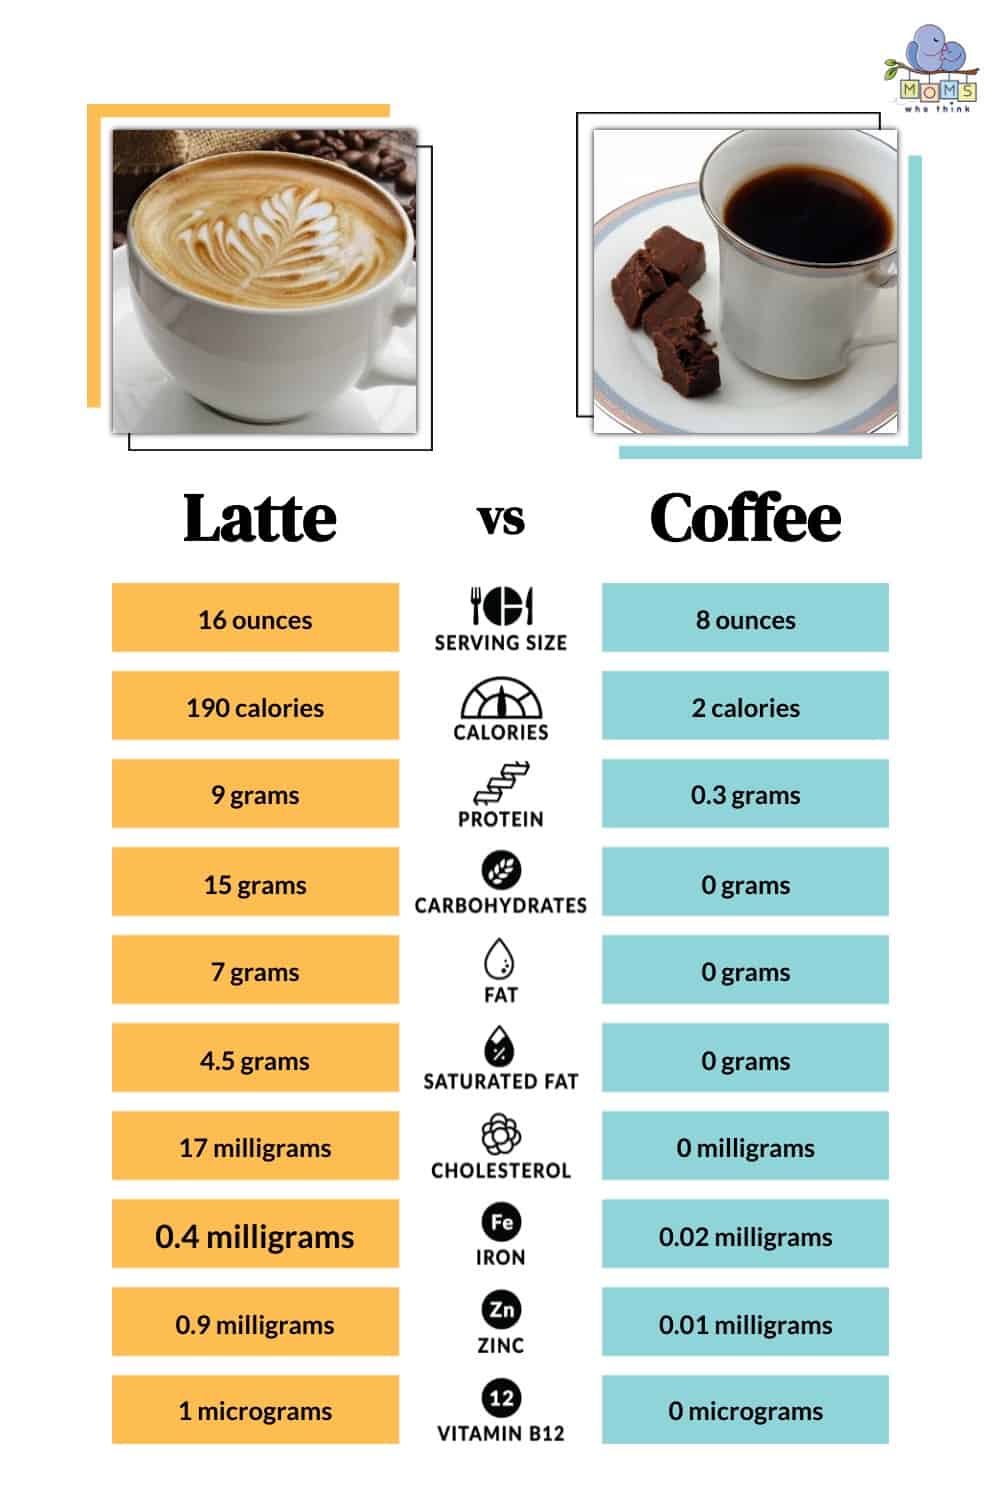 What is the Difference Between Latte and Cappuccino